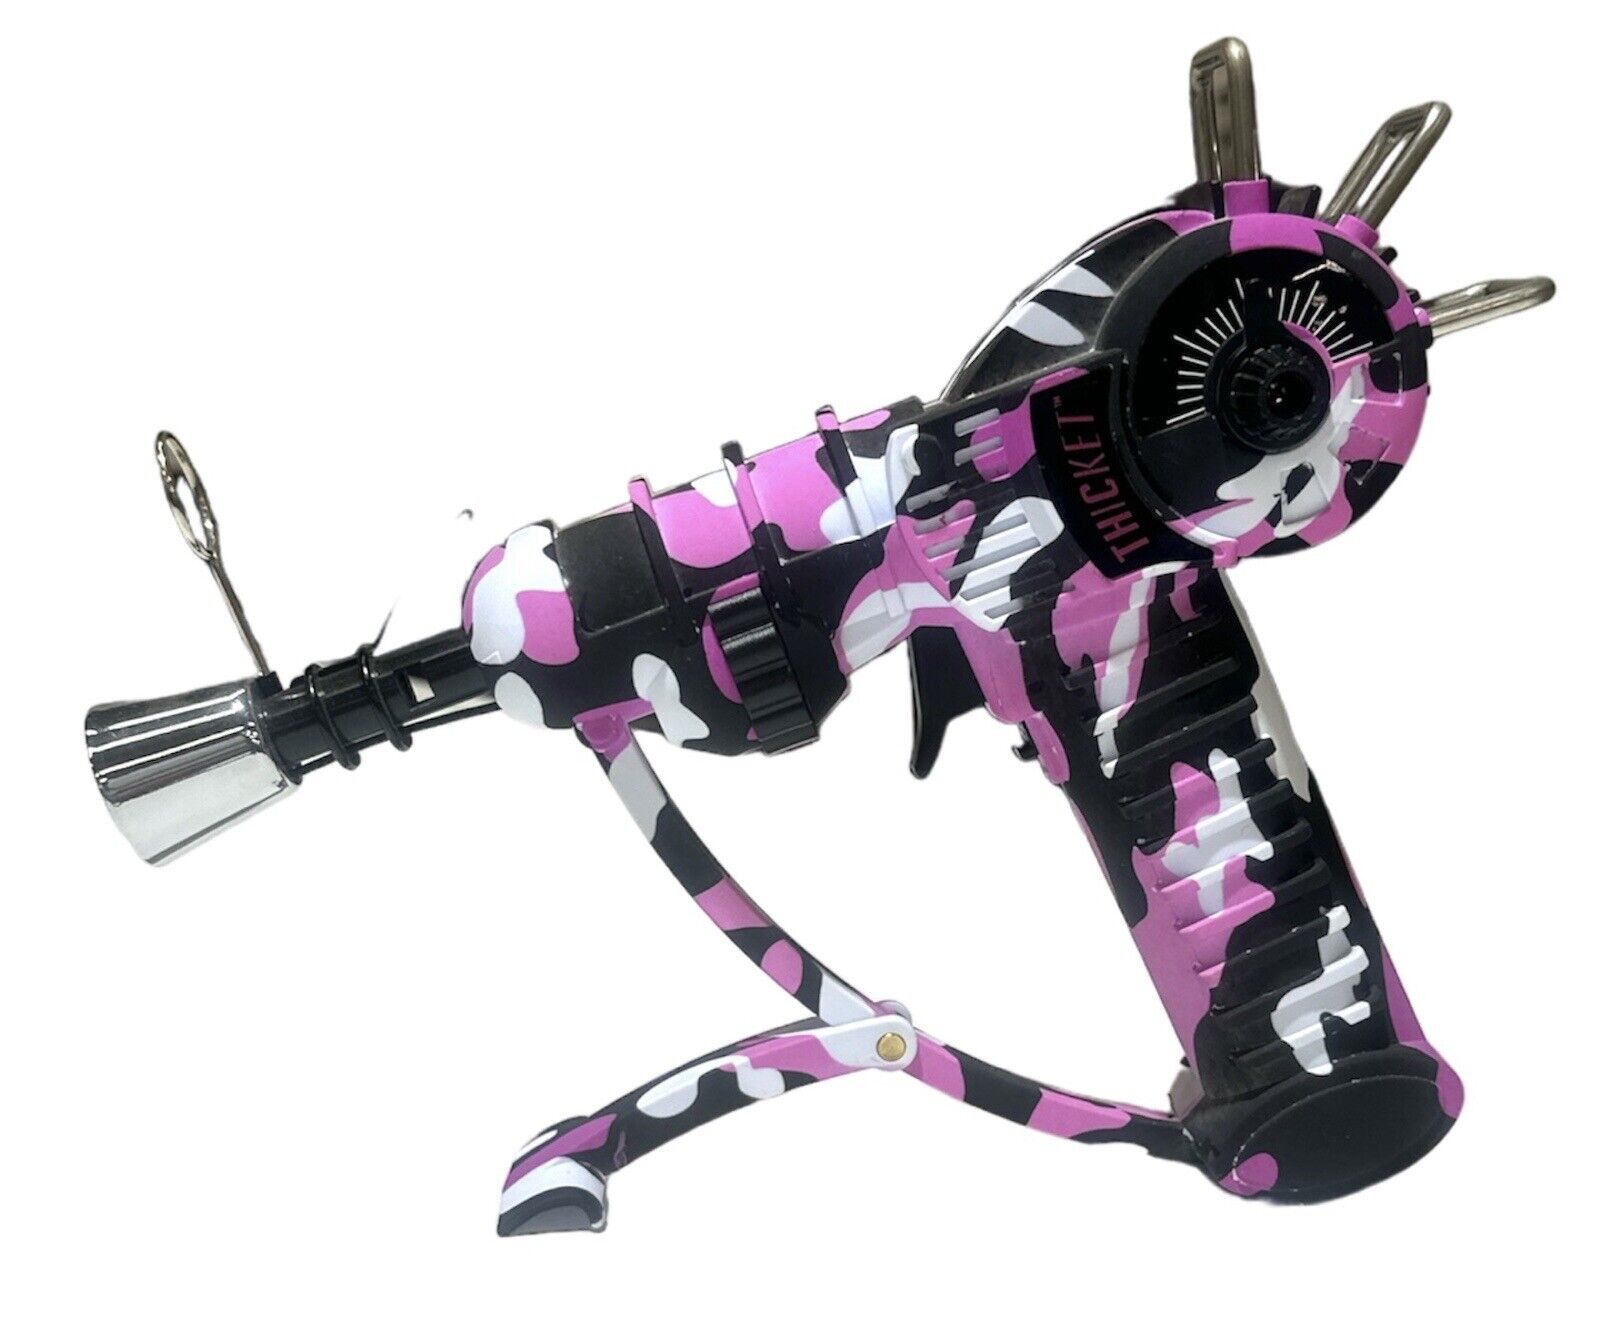 Ray Gun Torch Lighter - Space out Toy Gun Style Lighter Torch -  Camo  Pink